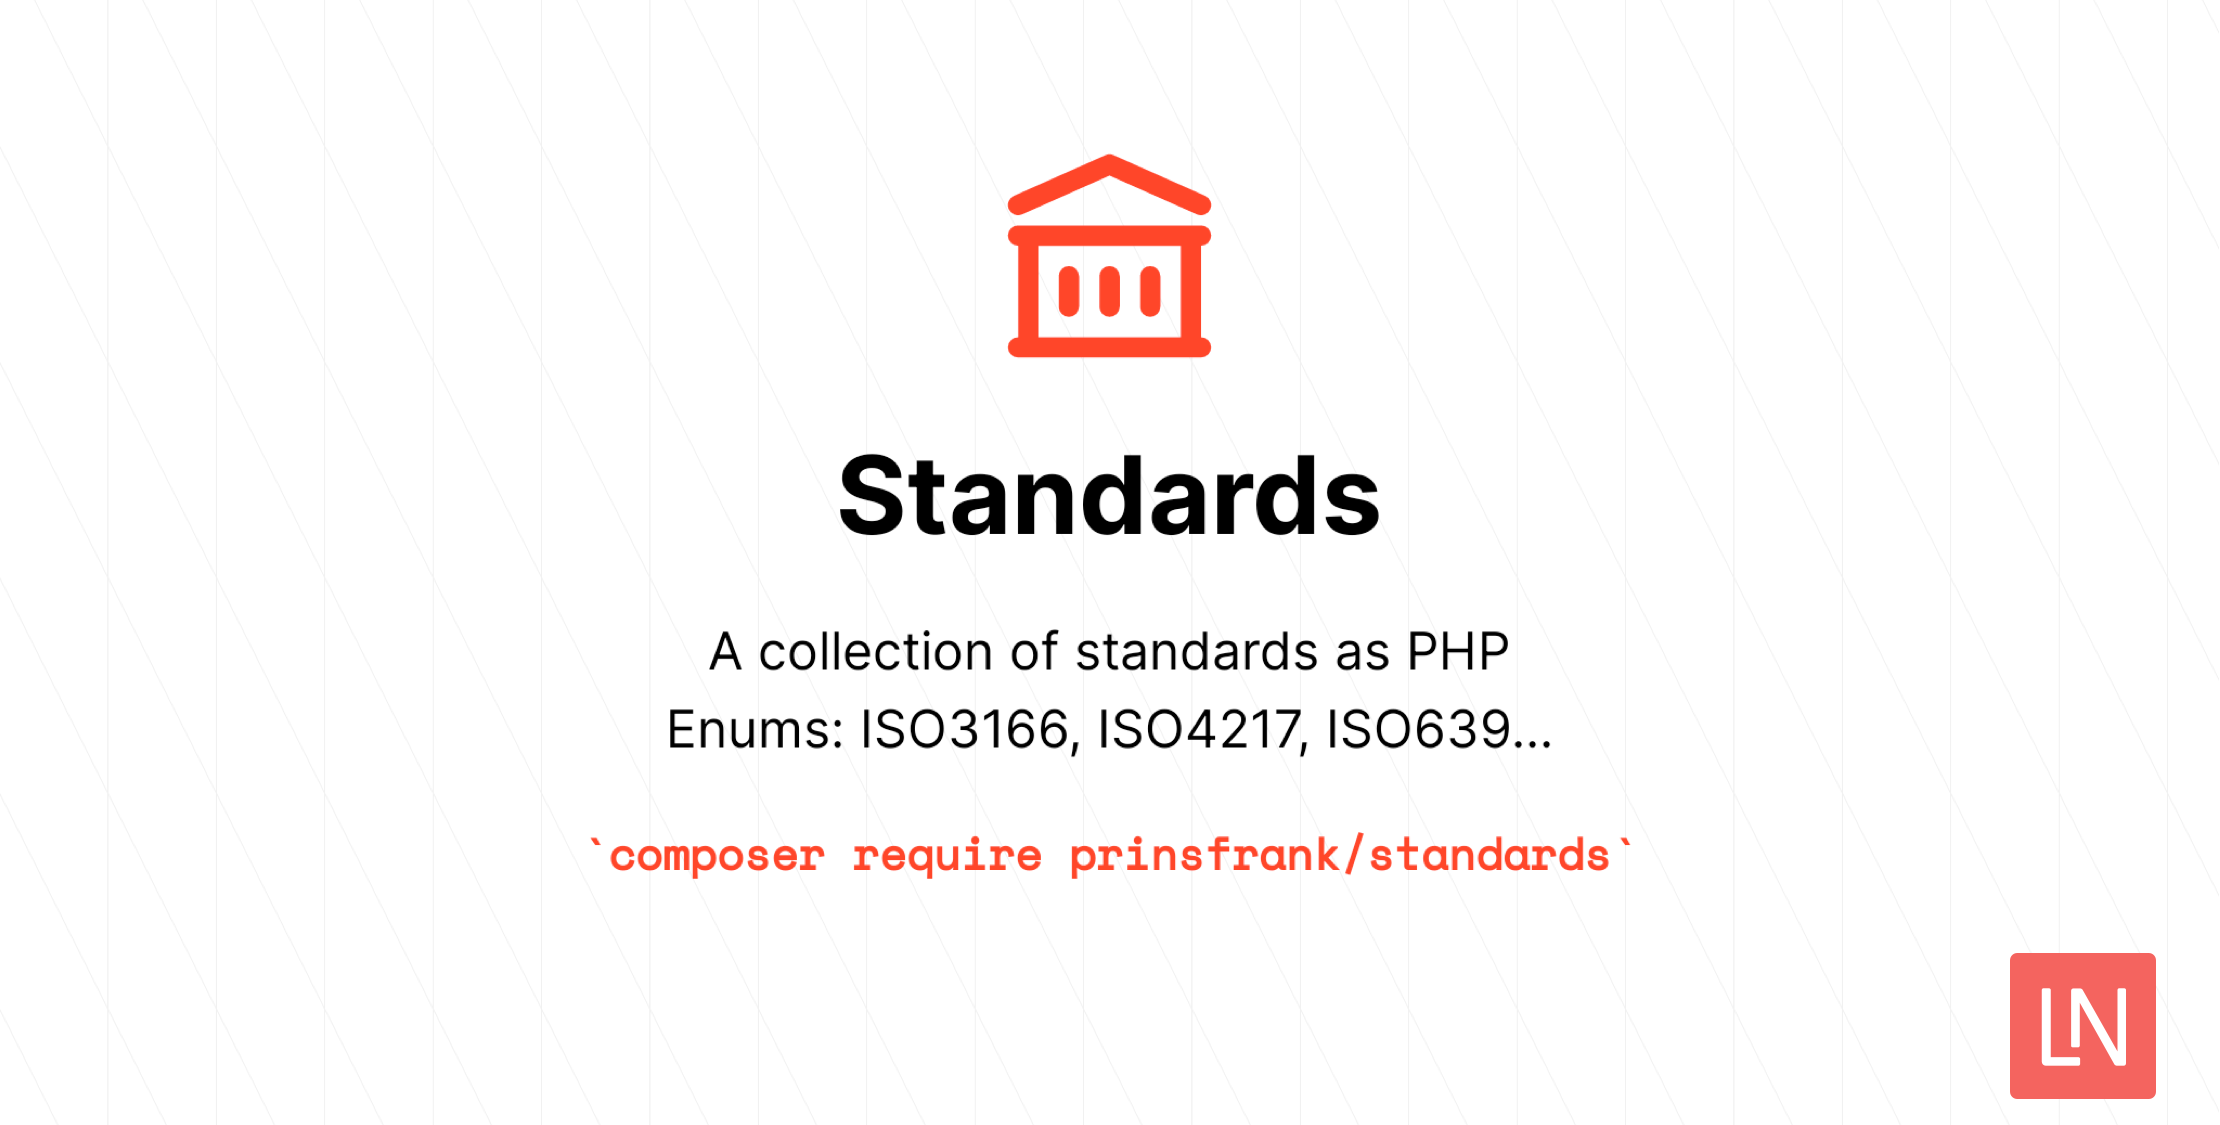 A Collection of ISO standards as PHP Enums image